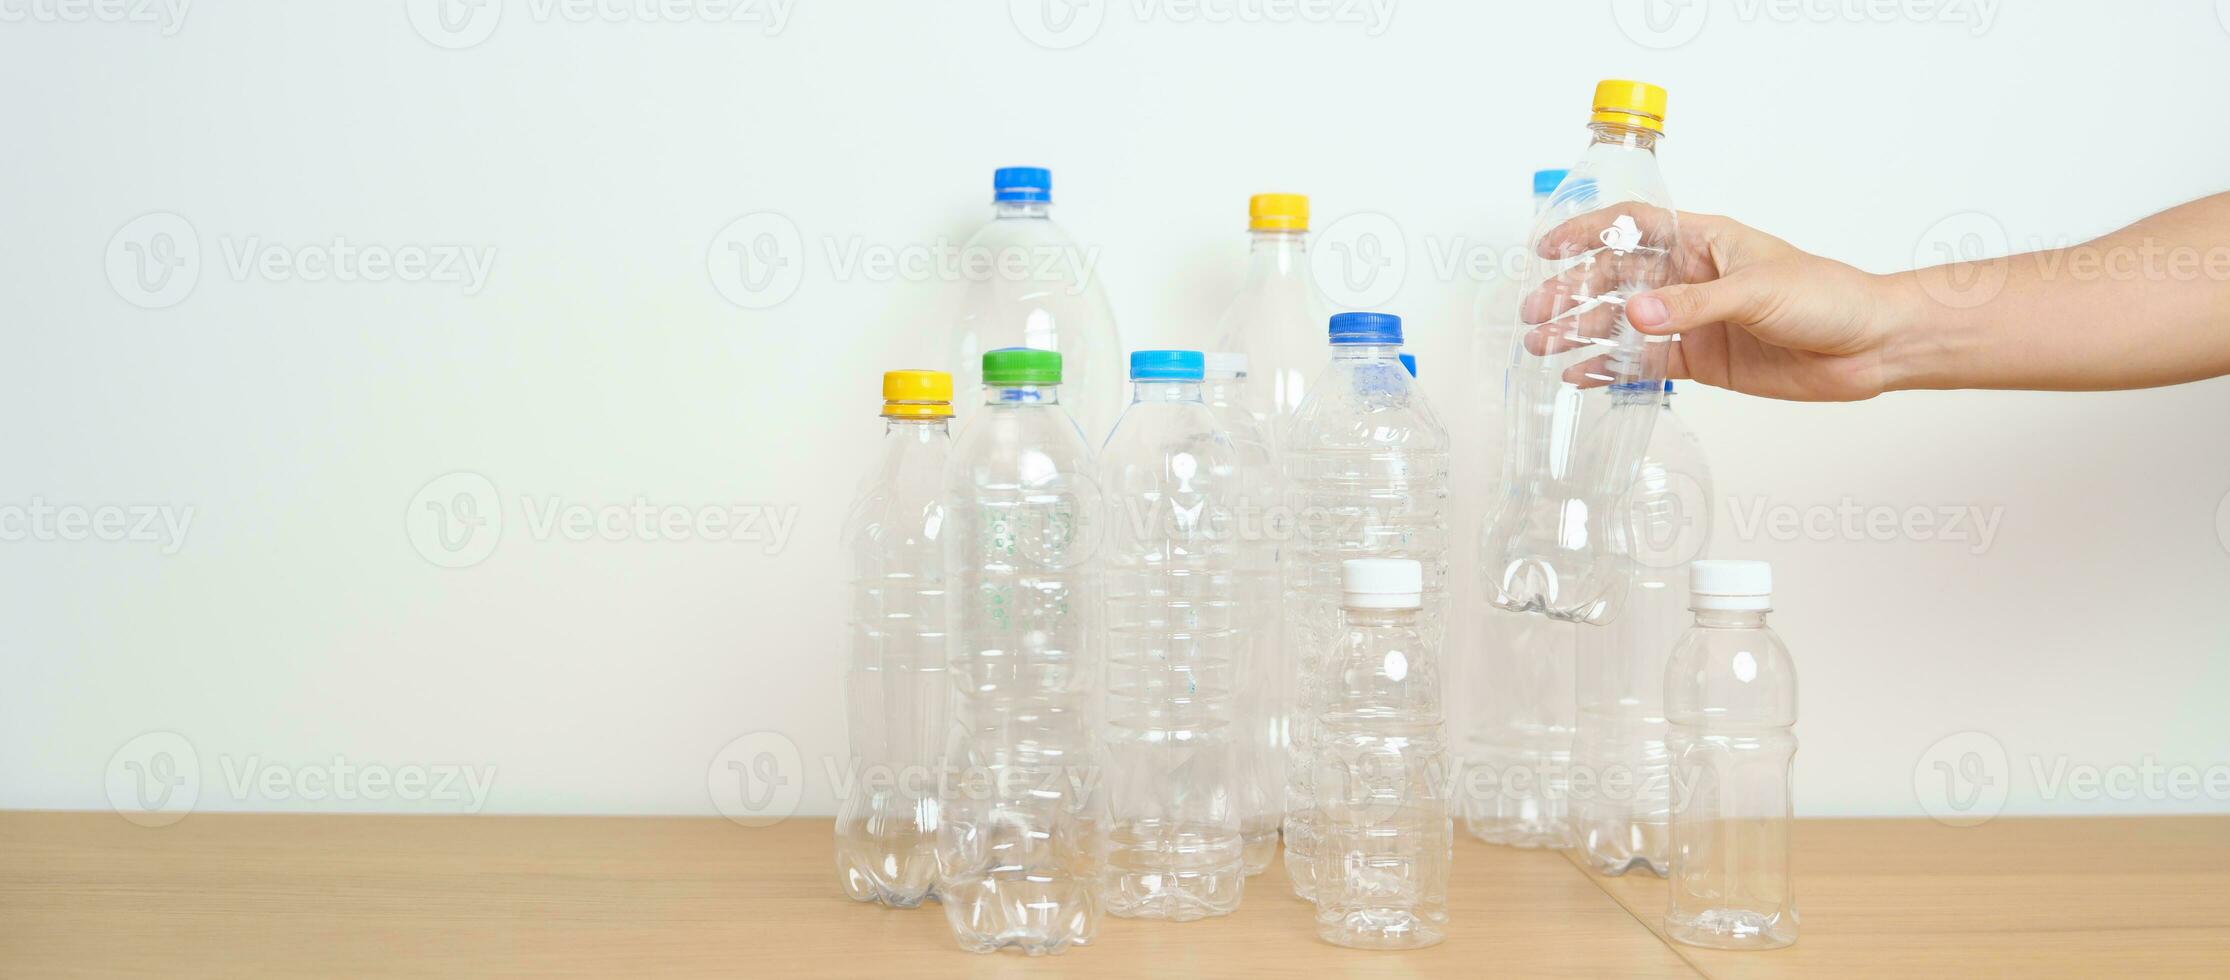 Plastic bottle on table at home or office. Recycle garbage Sorting. Plastic Free, Ecology, Environmental, pollution, Dispose recycling, waste management and trash Separation concept photo